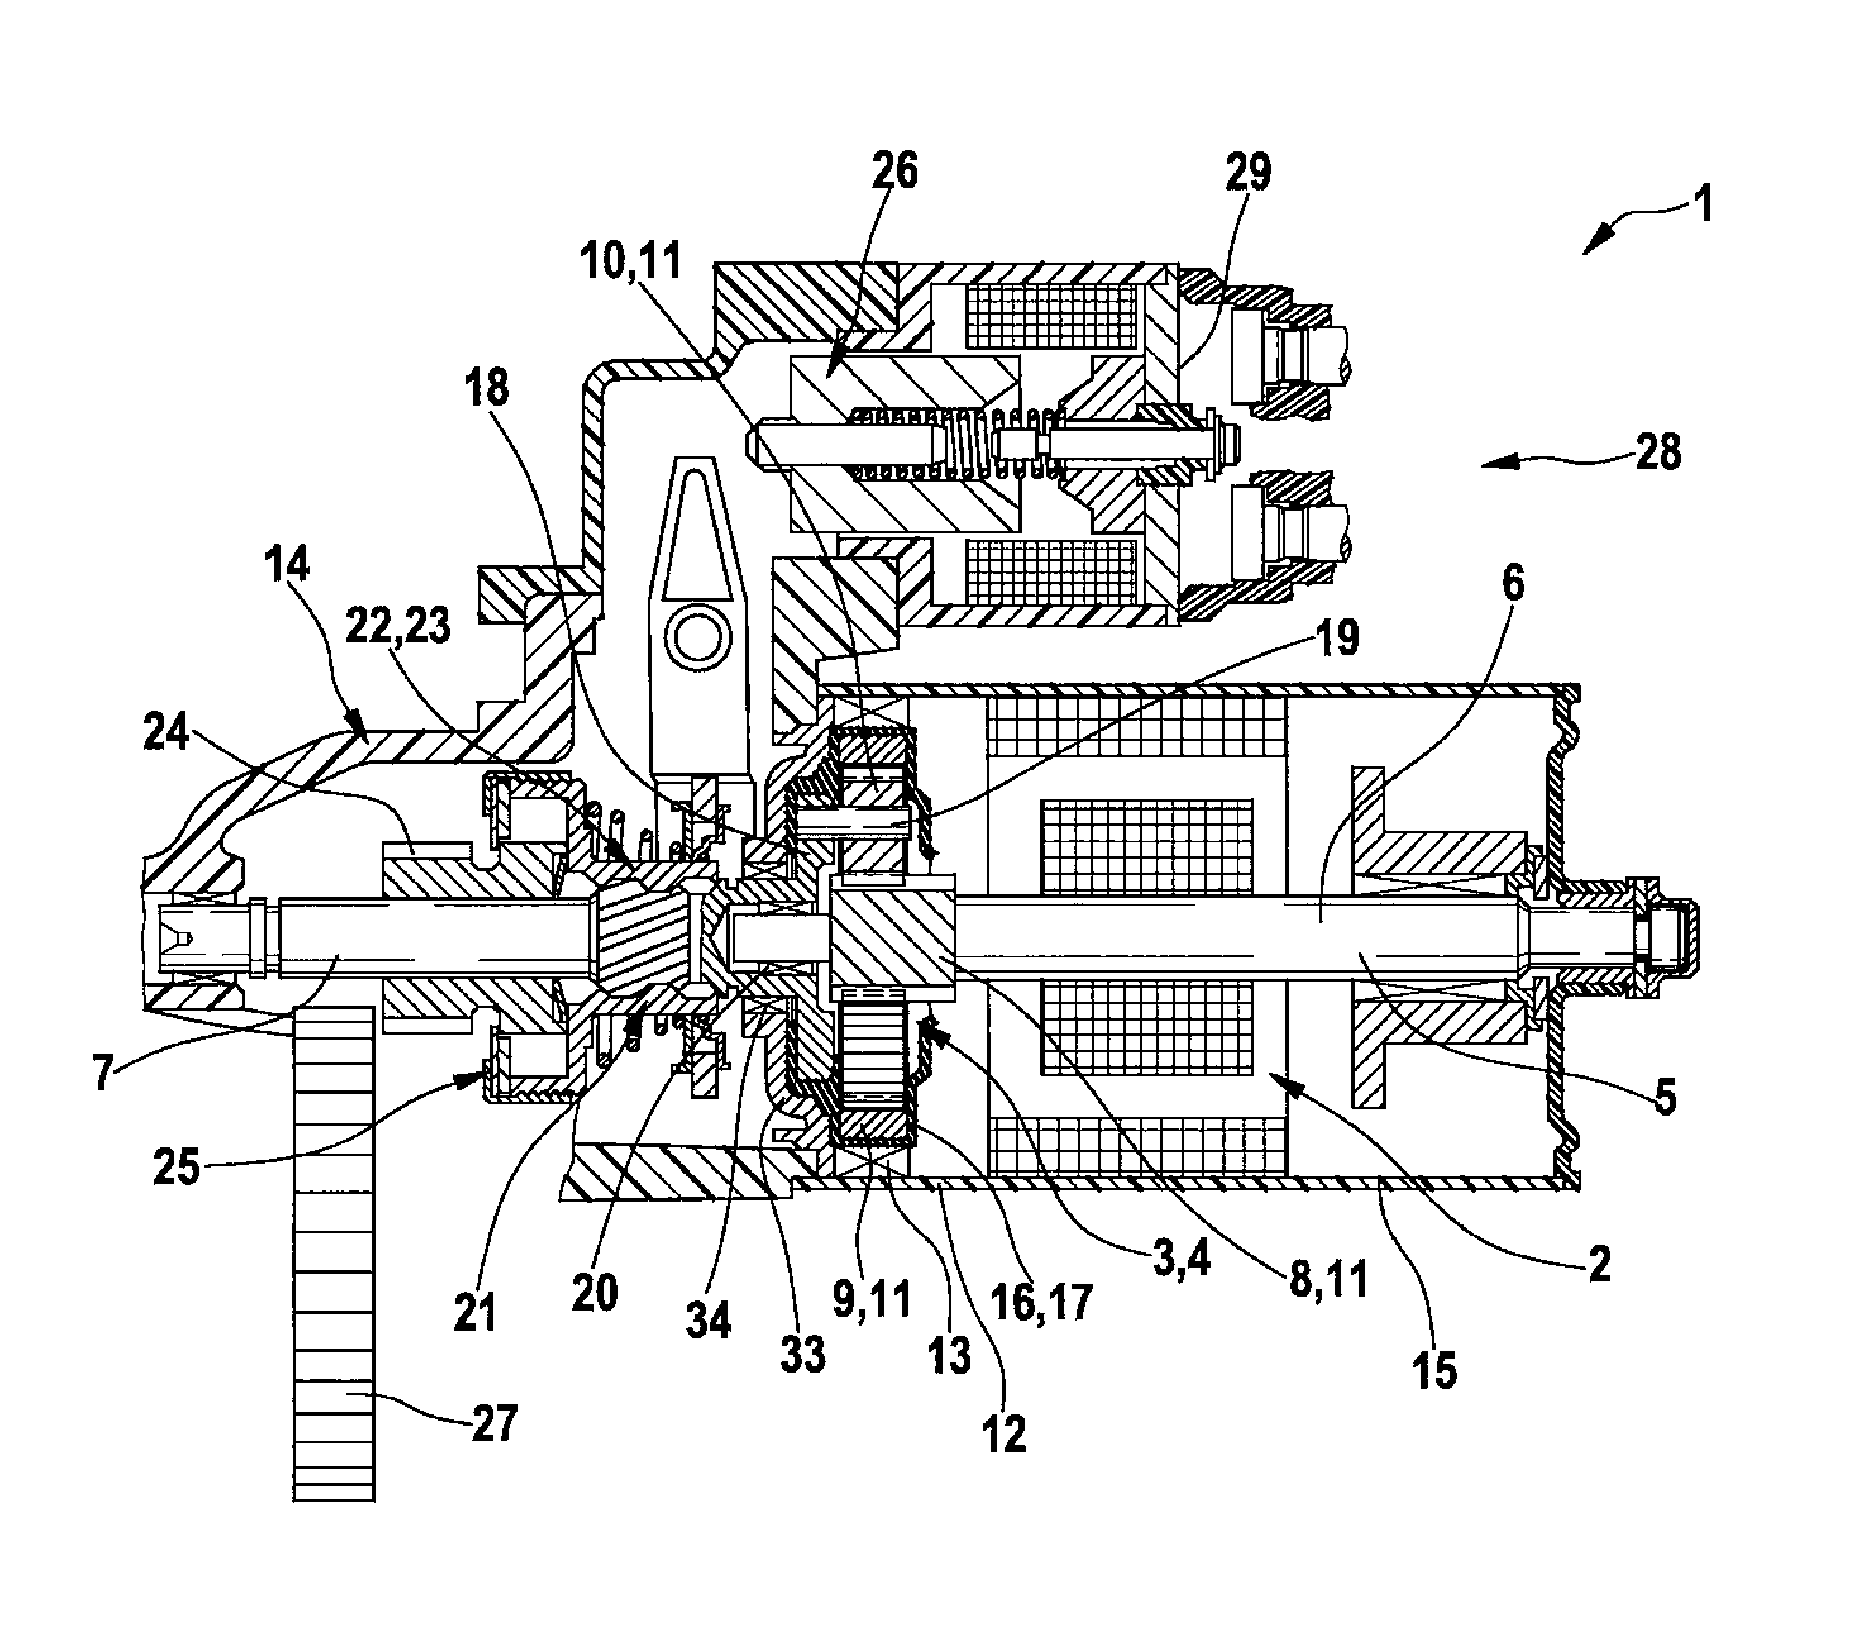 Reducing gear and starter device of an internal combustion engine